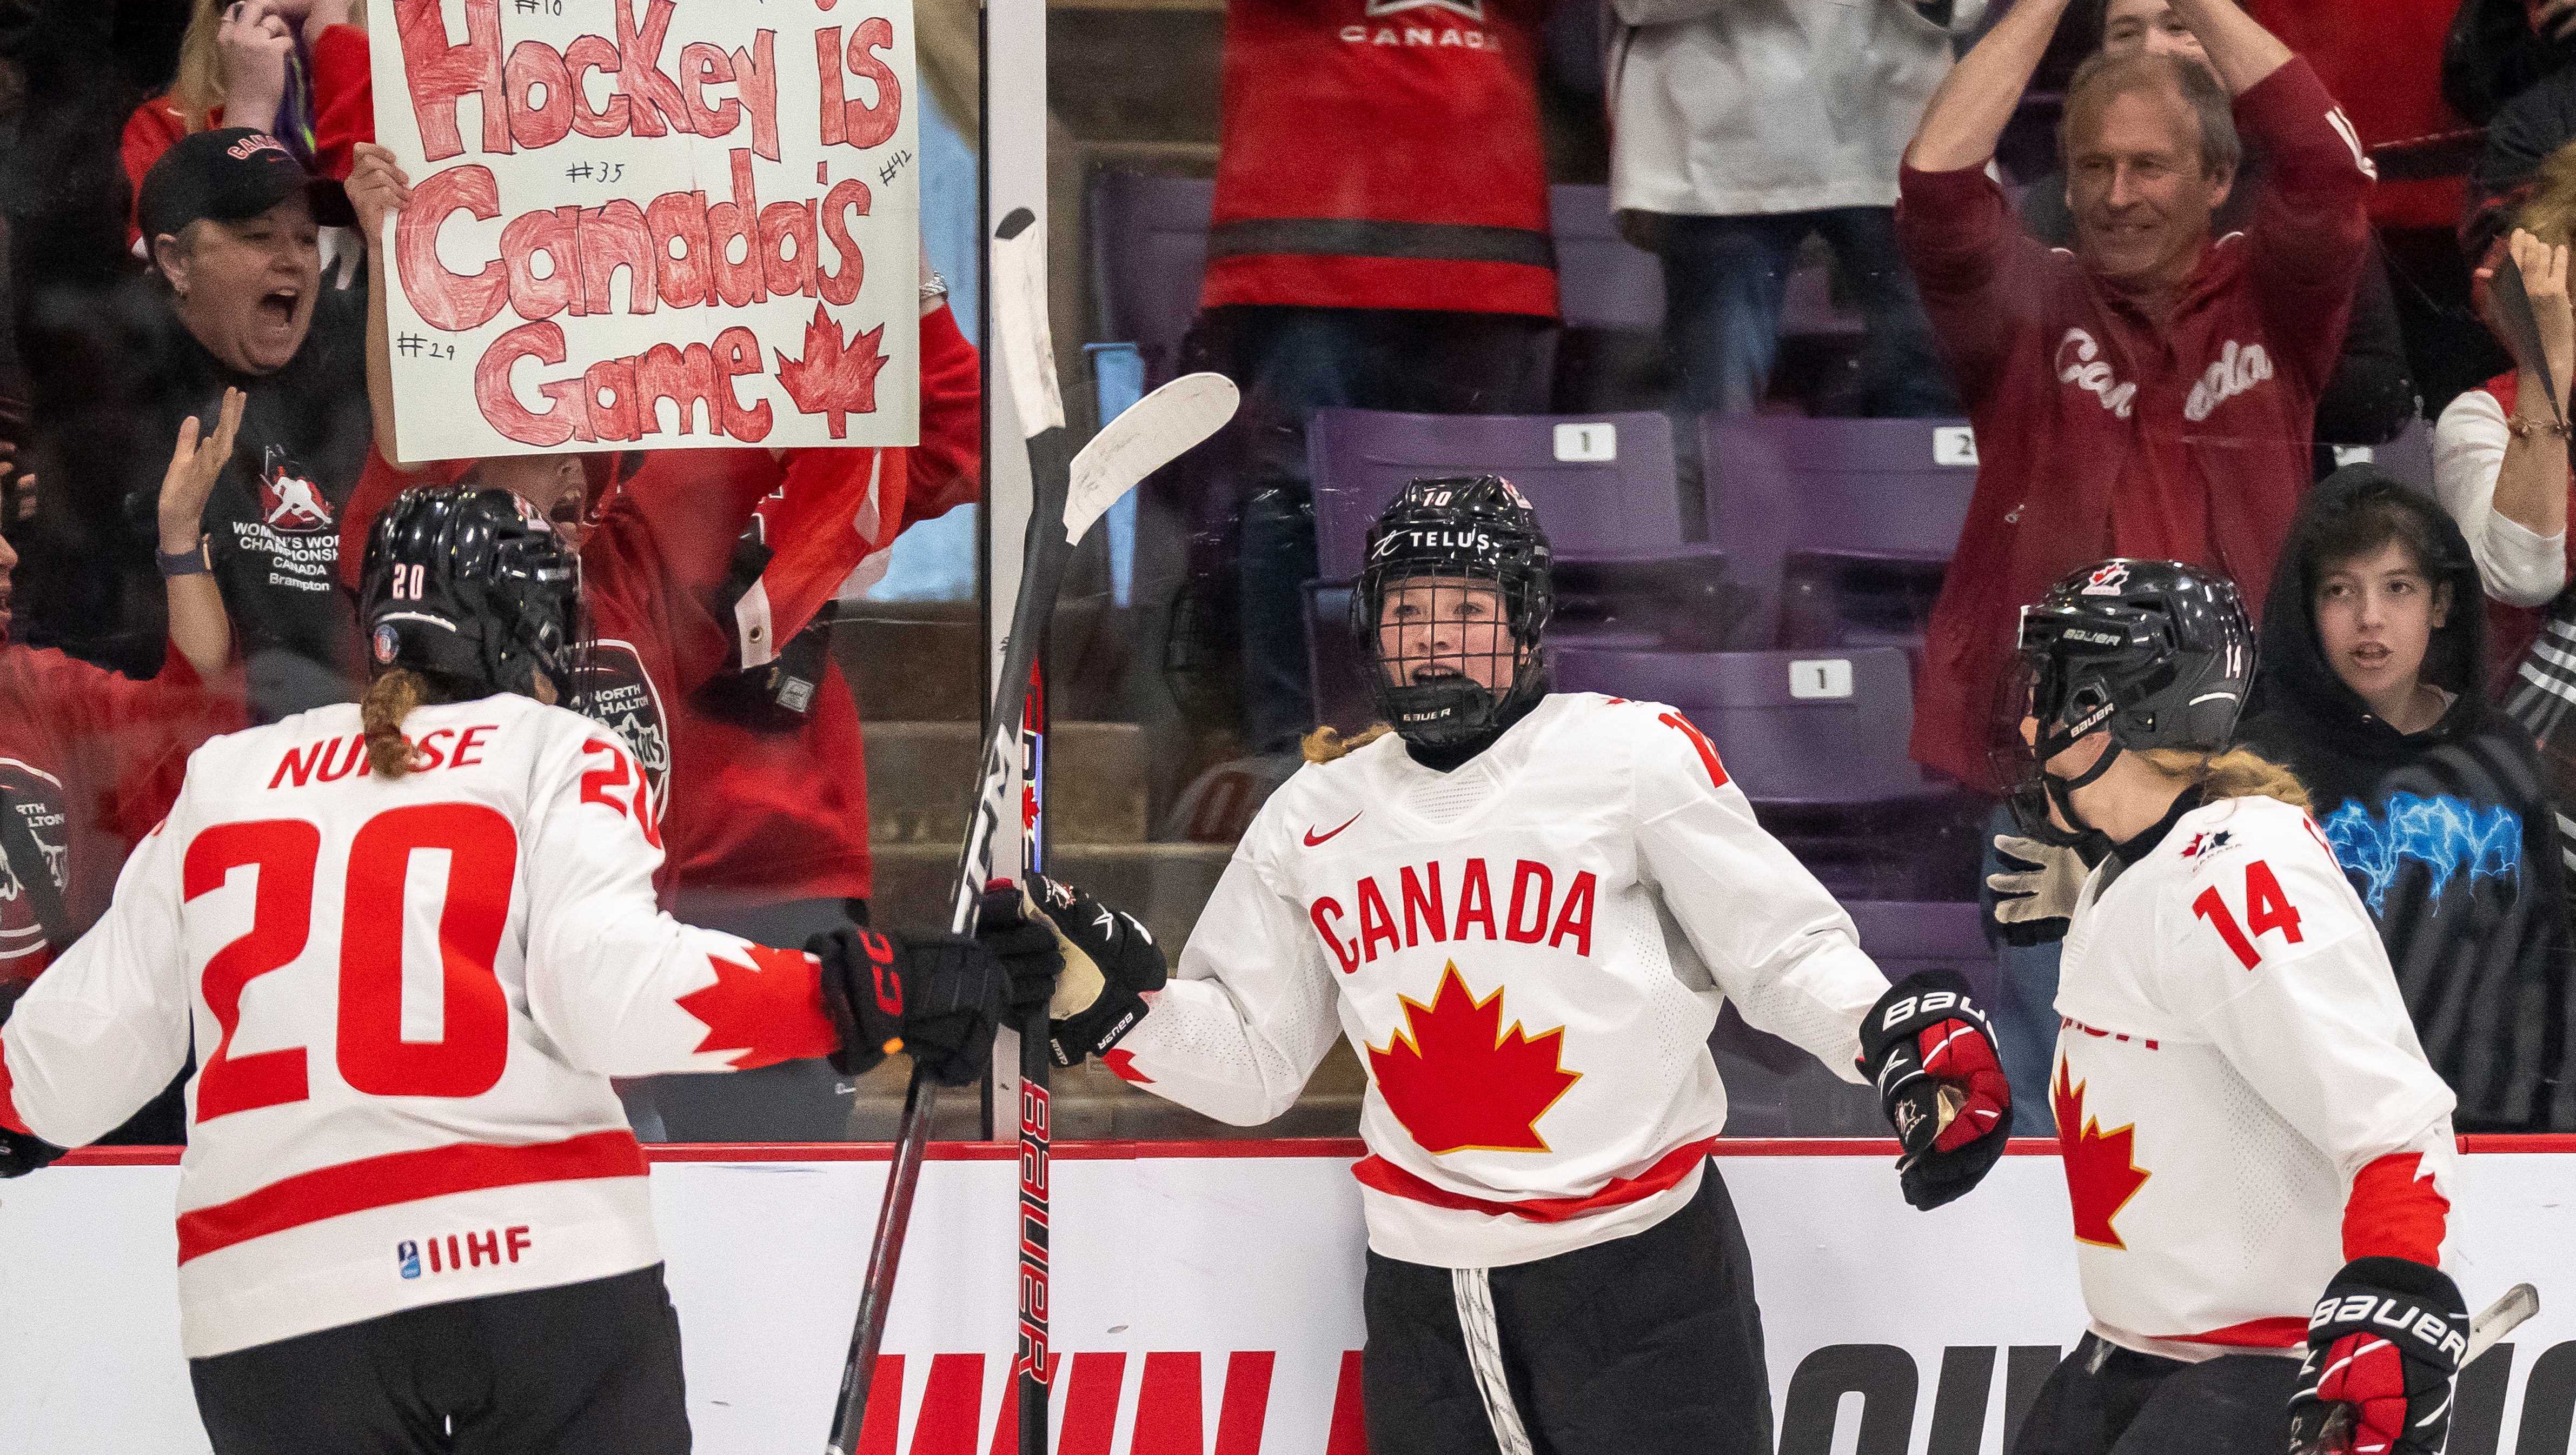 Best of 2021: Team Canada wins first women's hockey world title since 2012  - Team Canada - Official Olympic Team Website